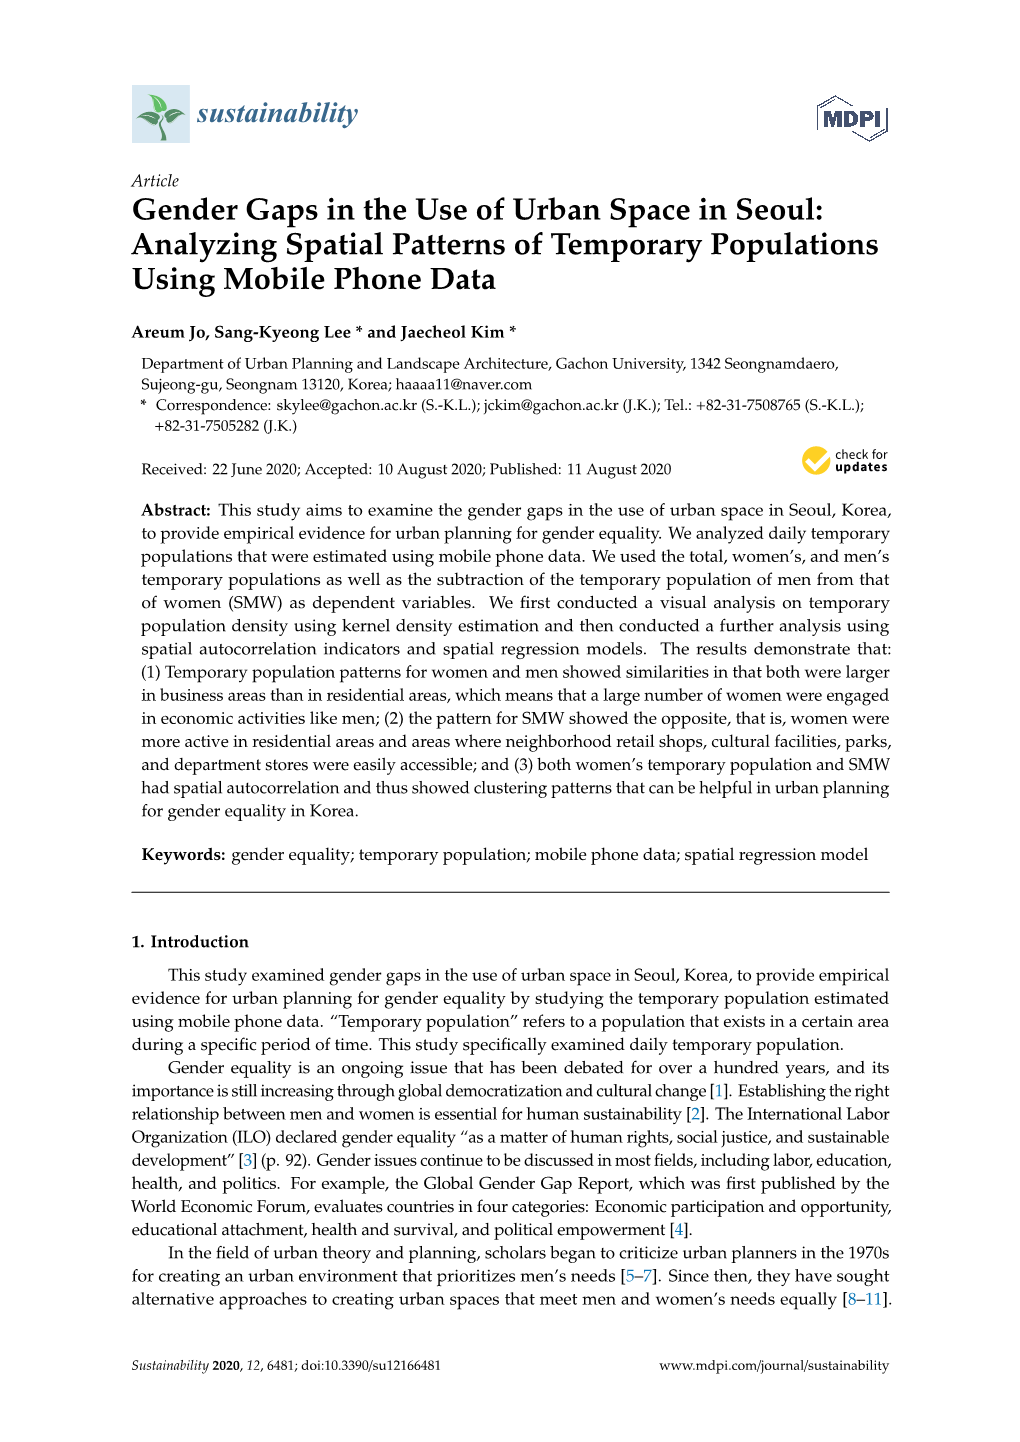 Gender Gaps in the Use of Urban Space in Seoul: Analyzing Spatial Patterns of Temporary Populations Using Mobile Phone Data